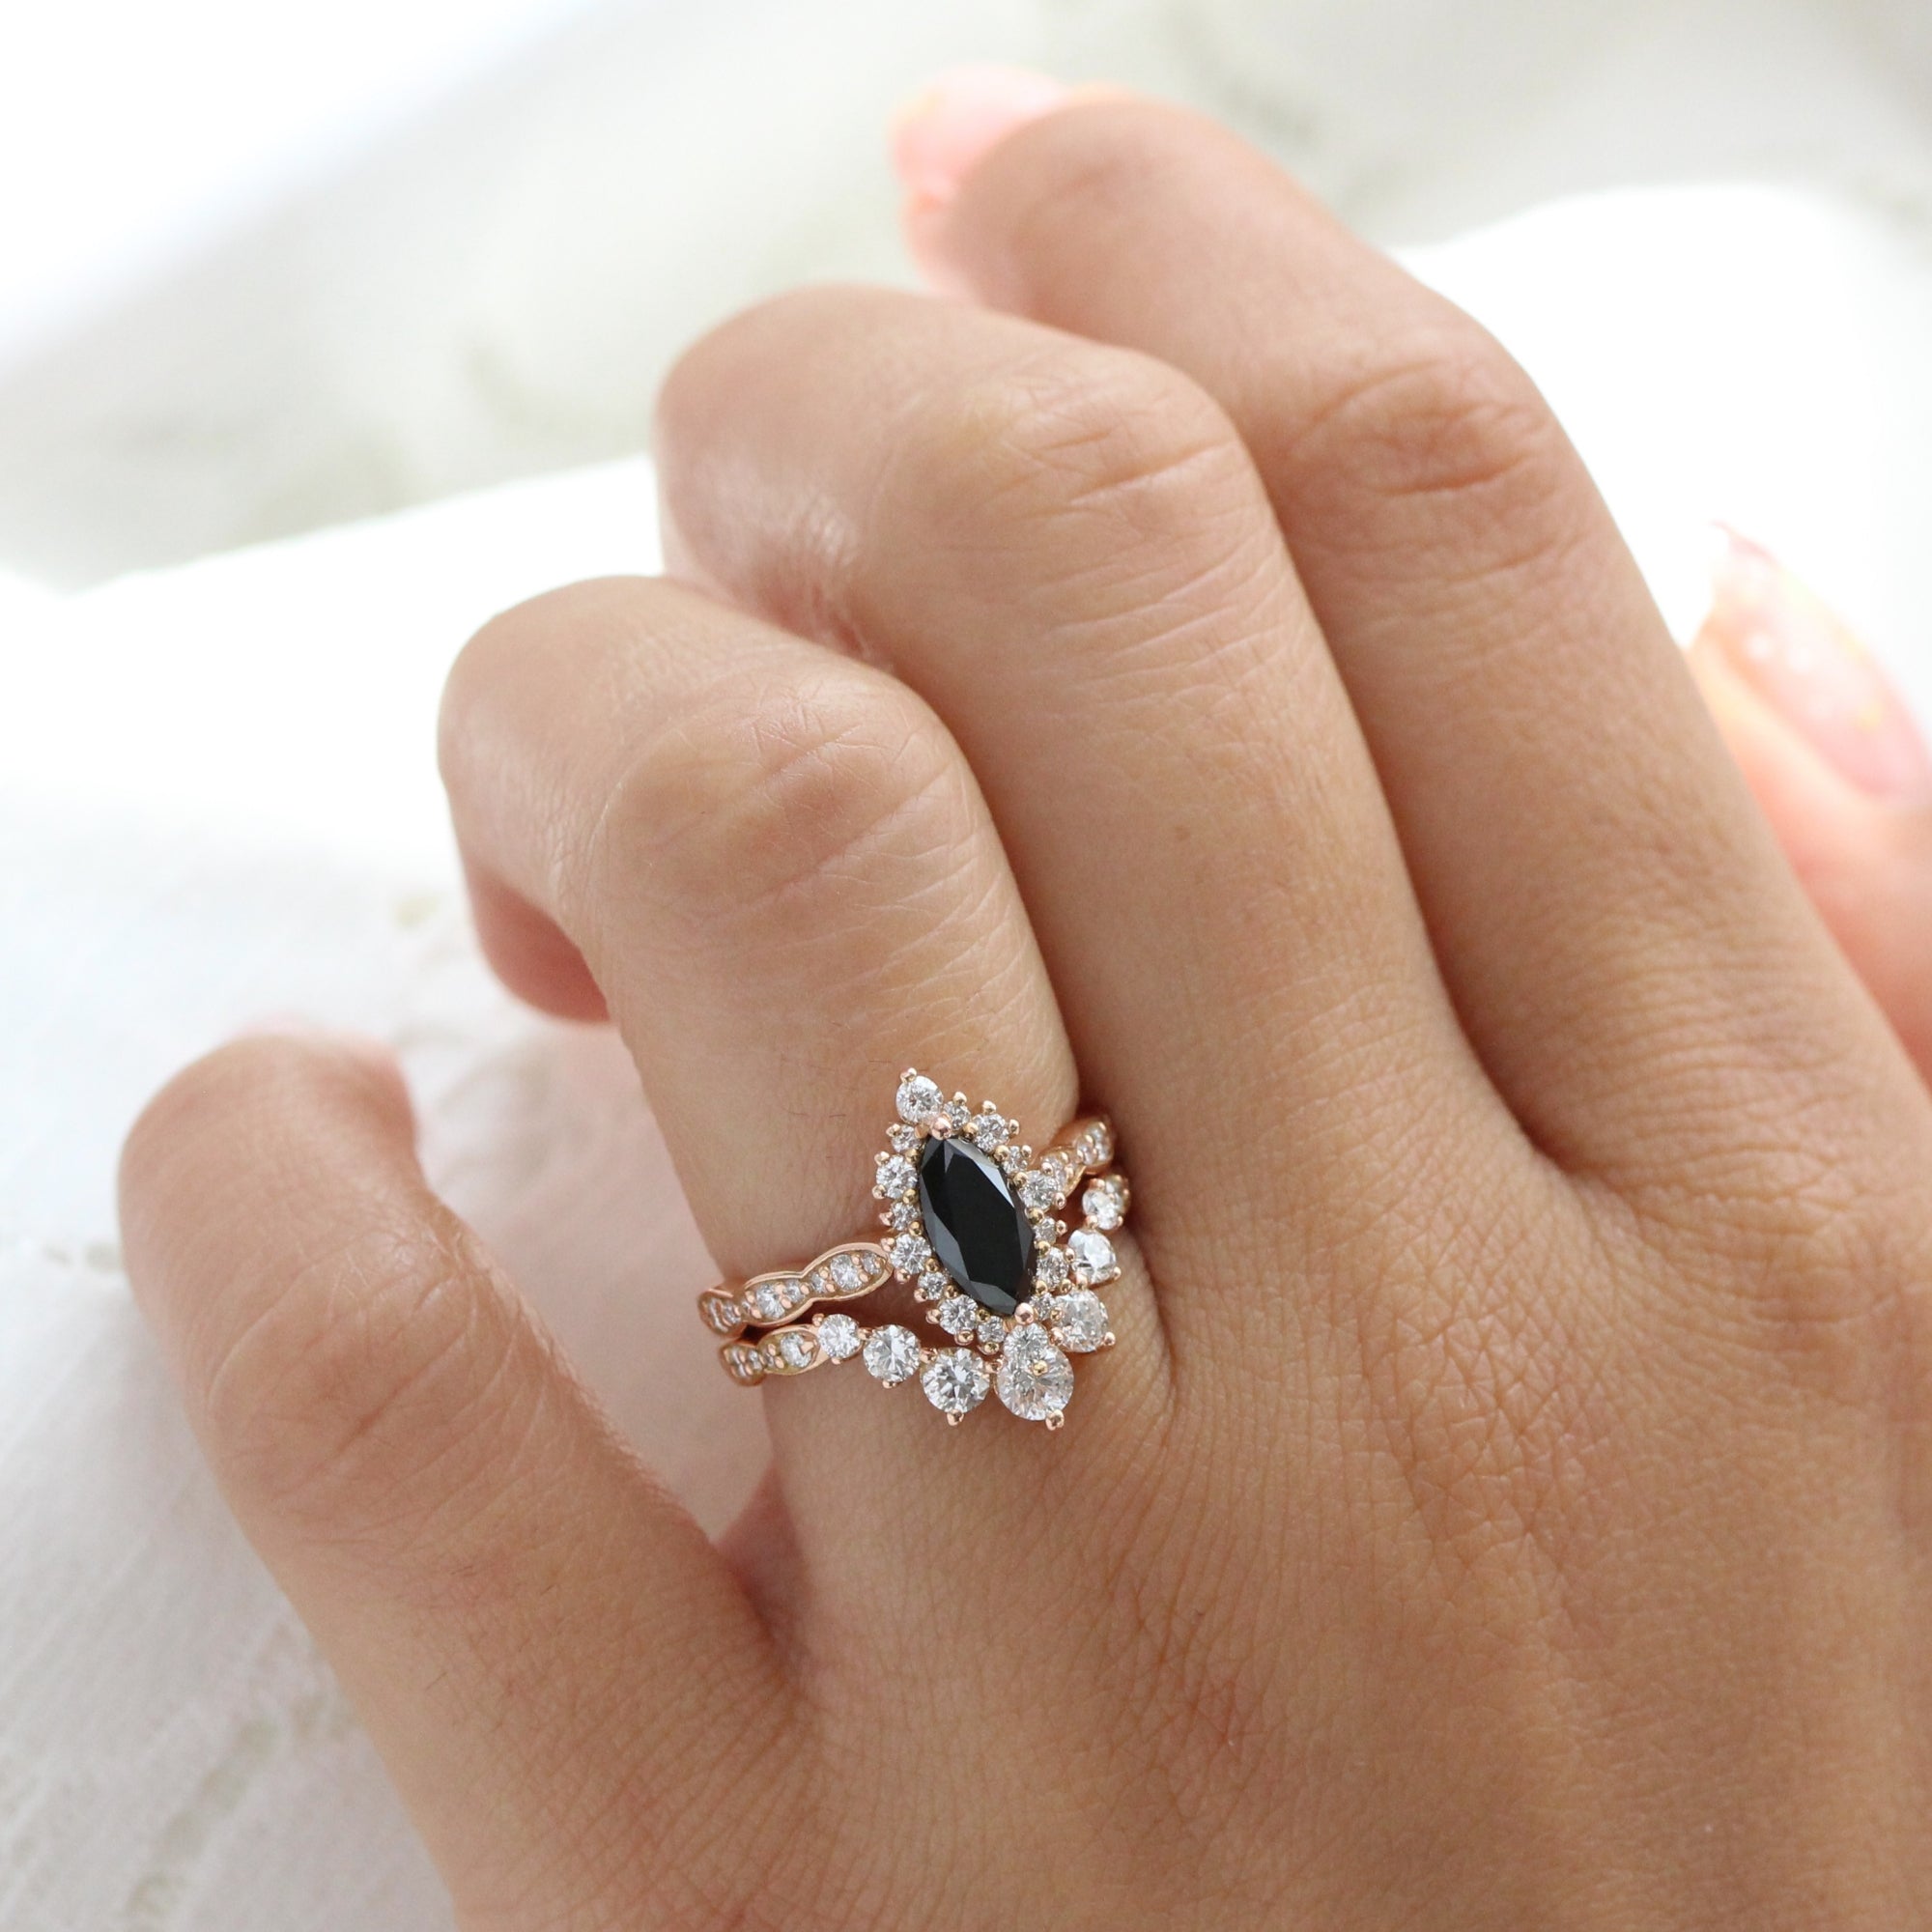 The Black Diamond Engagement Ring Trend-All You Need to Know - Jonathan's  Fine Jewelers